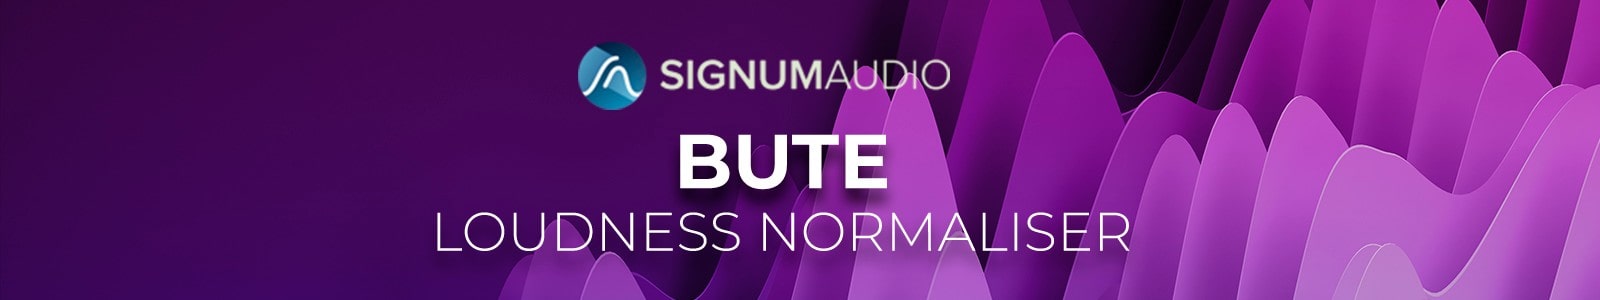 bute loudness normaliser